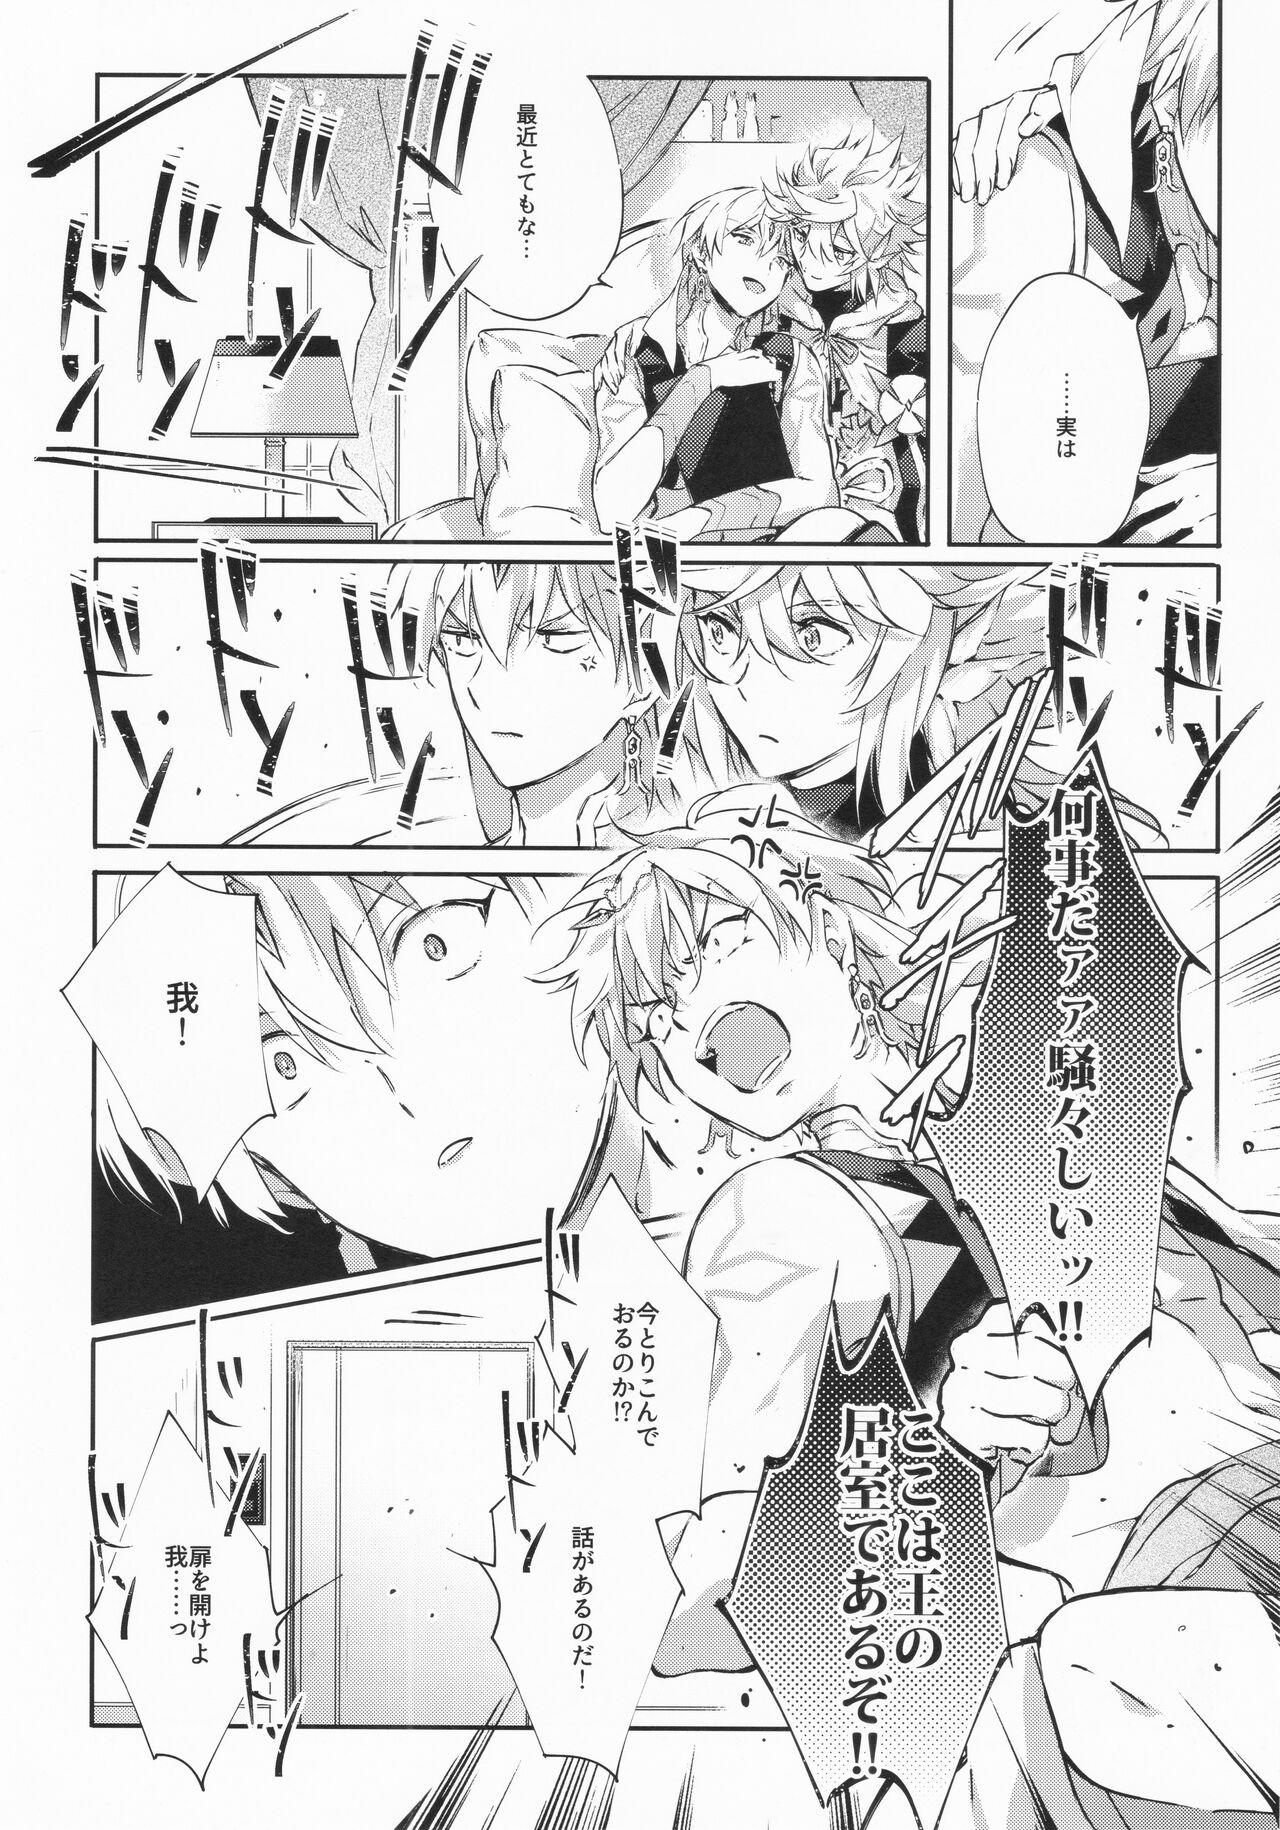 Fodendo STARDUST LOVESONG encore special story 1st After 7 Days - Fate grand order Class - Page 11